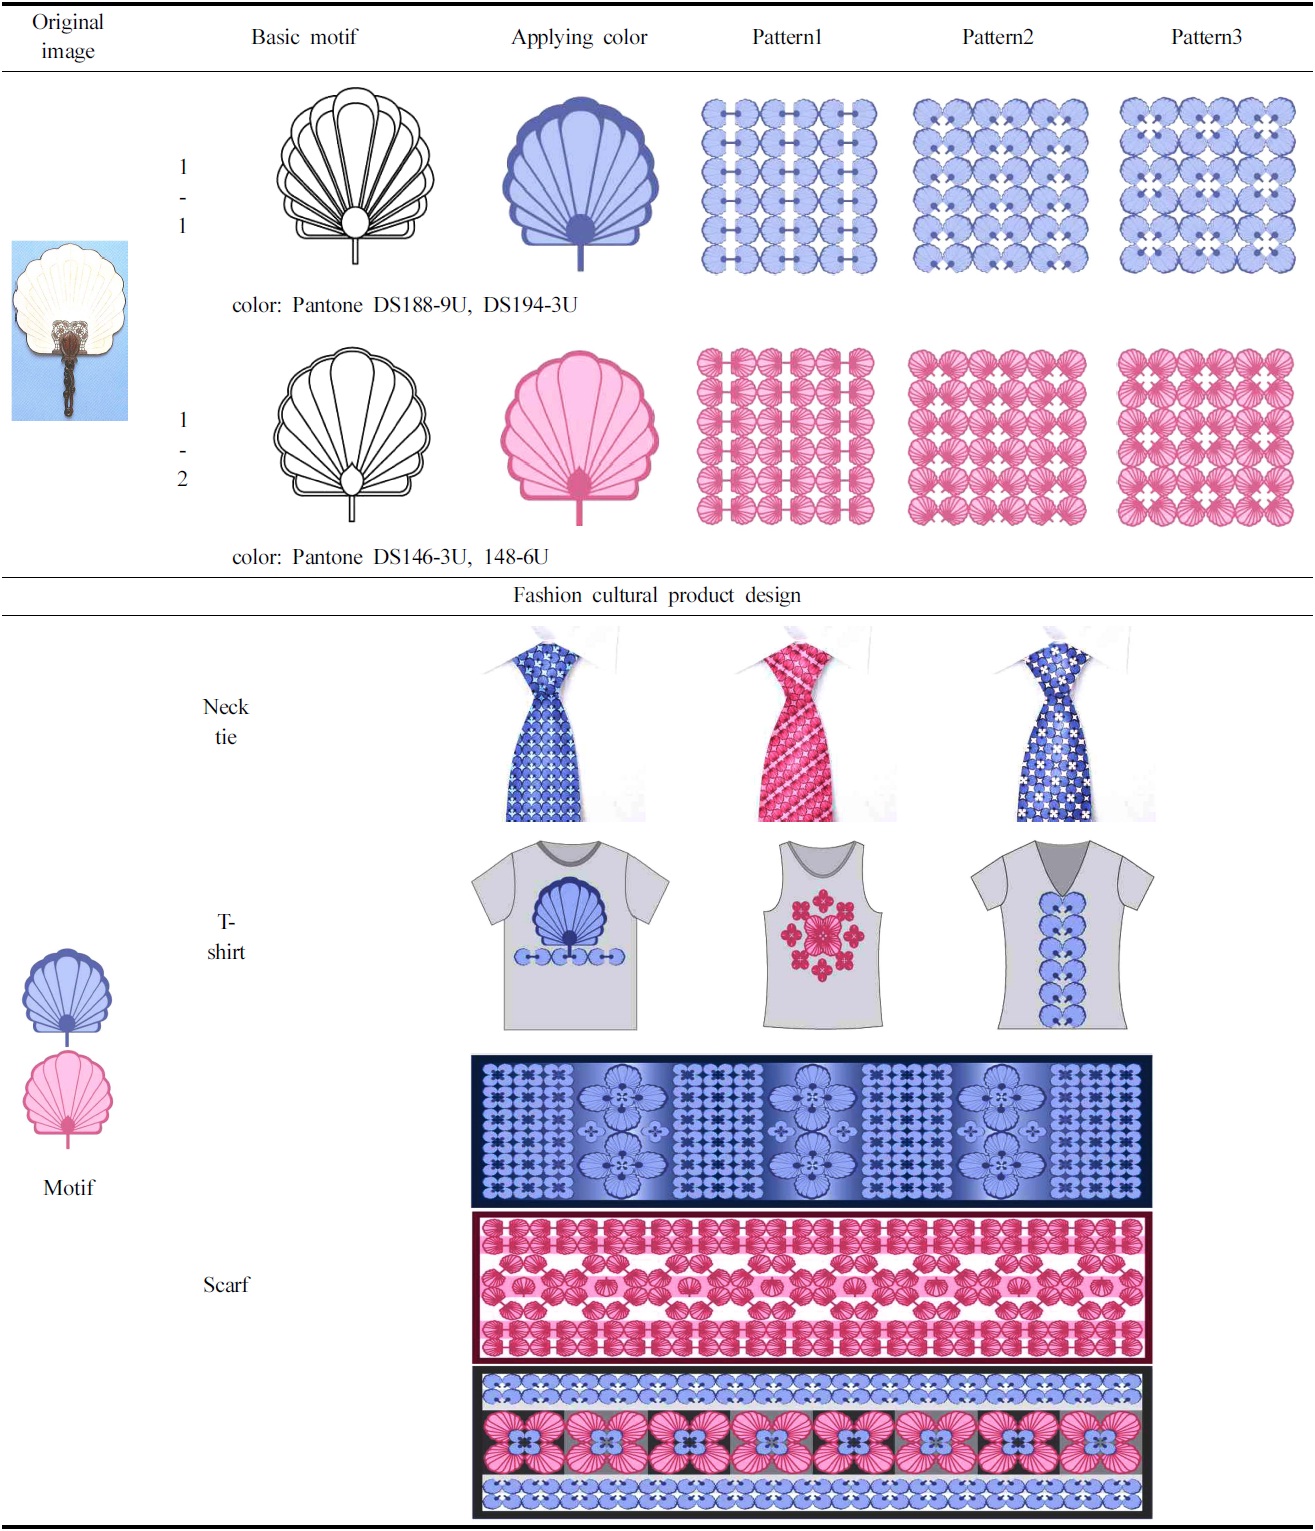 Development of motif design 1 and fashion cultural product design